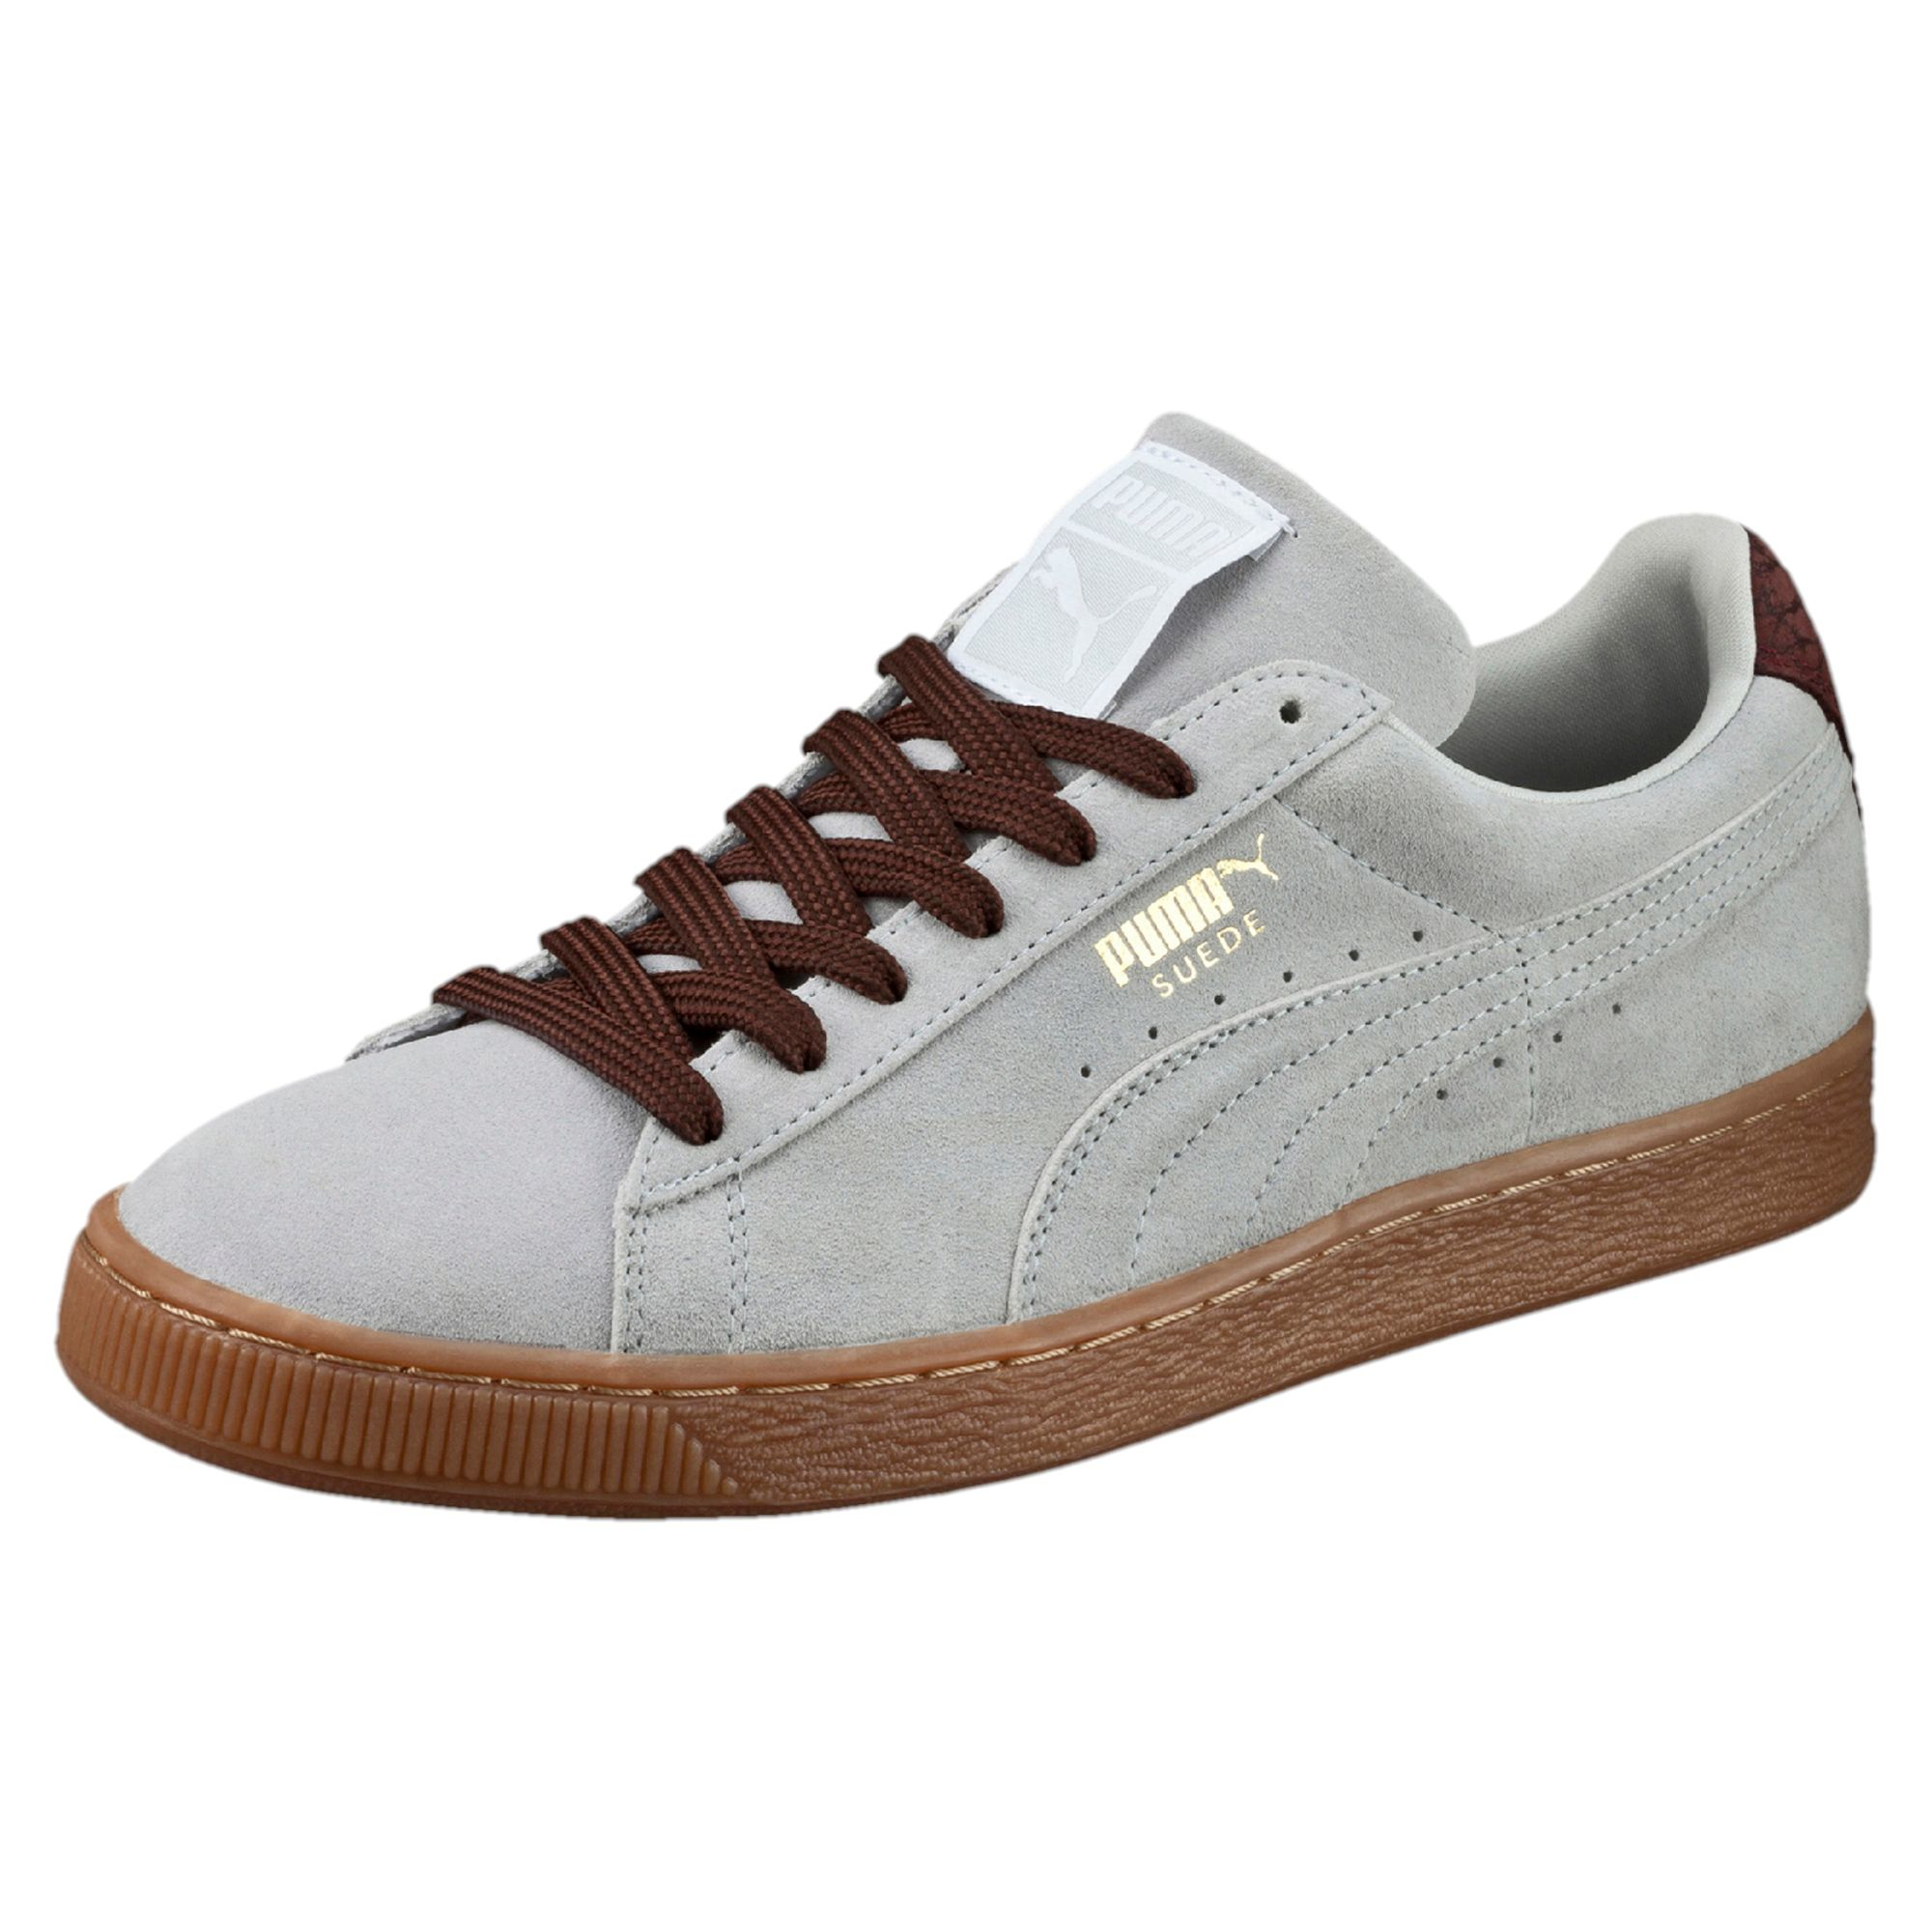 PUMA Suede Classic Casual Men's Sneakers in Brown for Men - Lyst